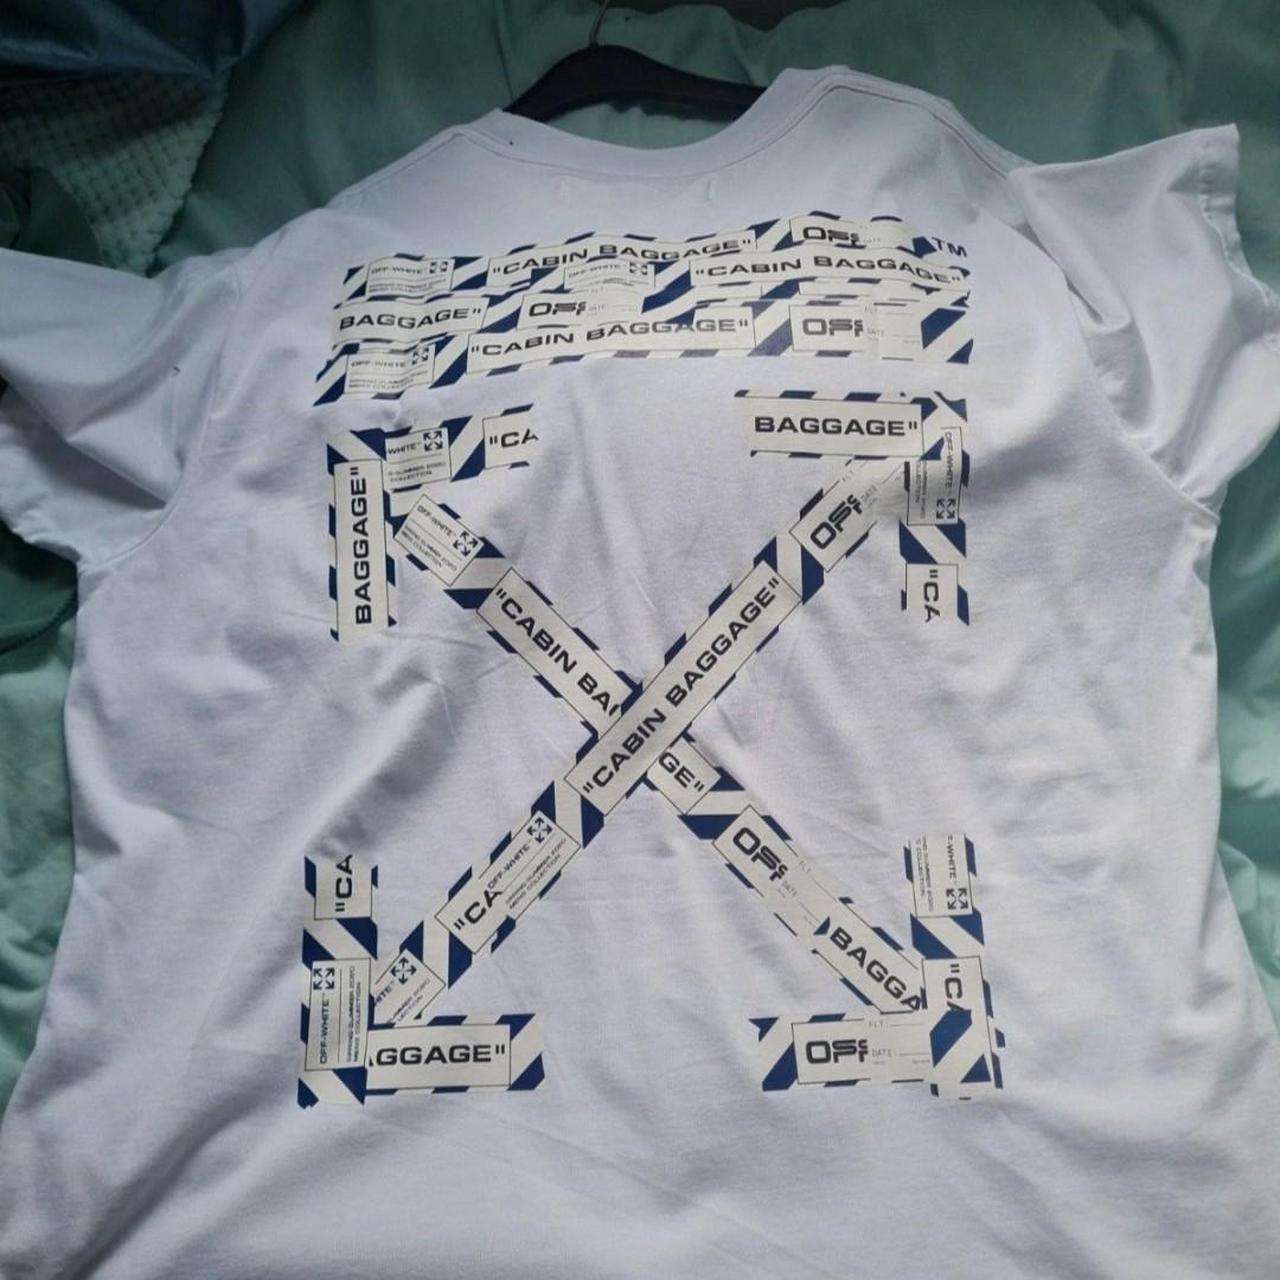 Off white brand new tshirt. Size L. I've had it for - Depop